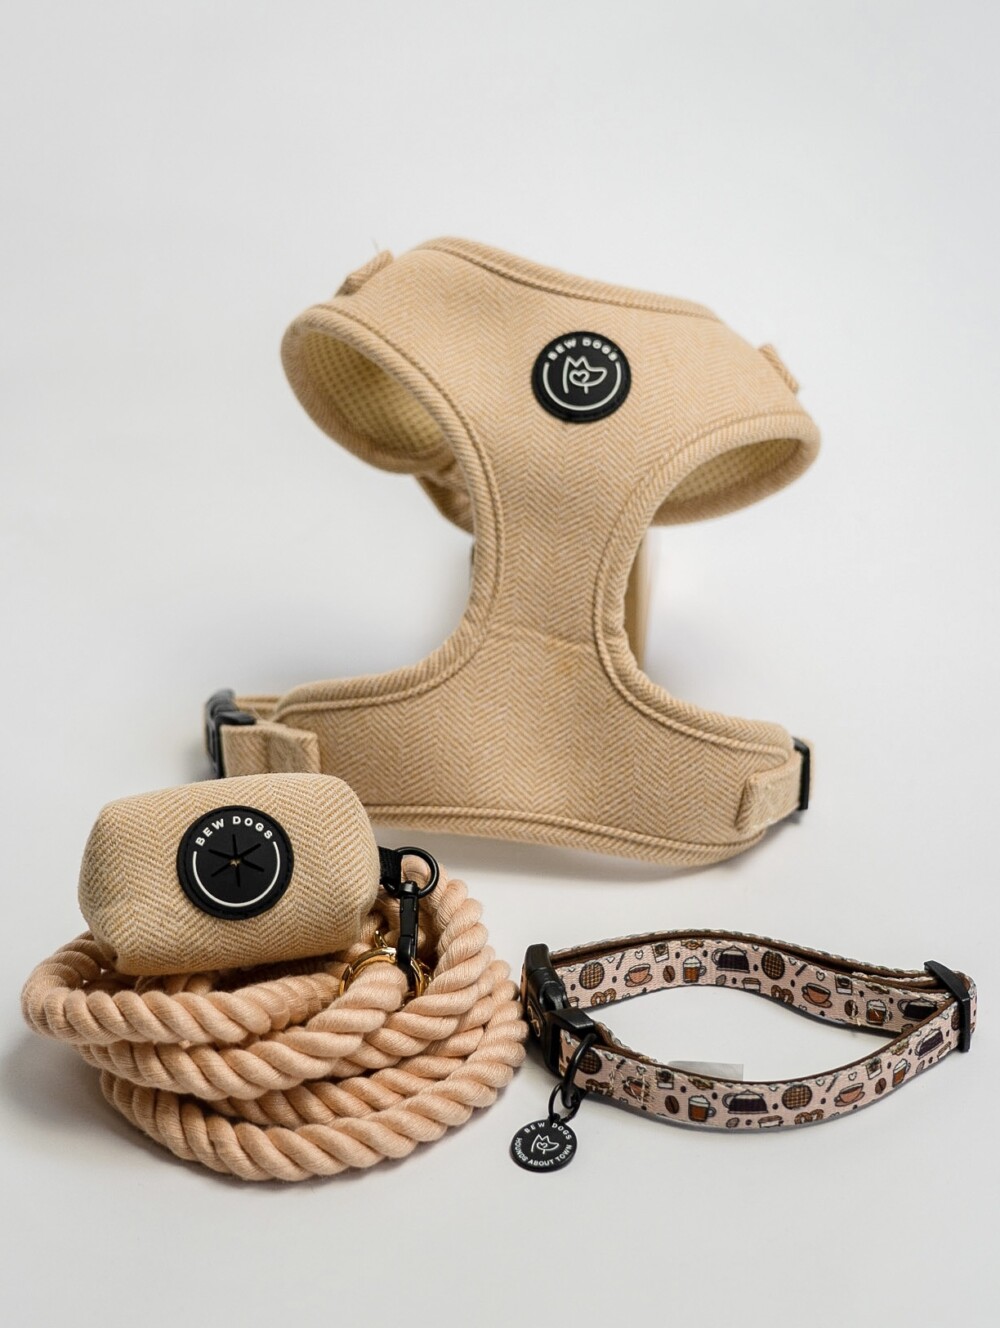 A cream herringbone harness, matching poop bag holder and rope lead plus a cream collar, against a white background.